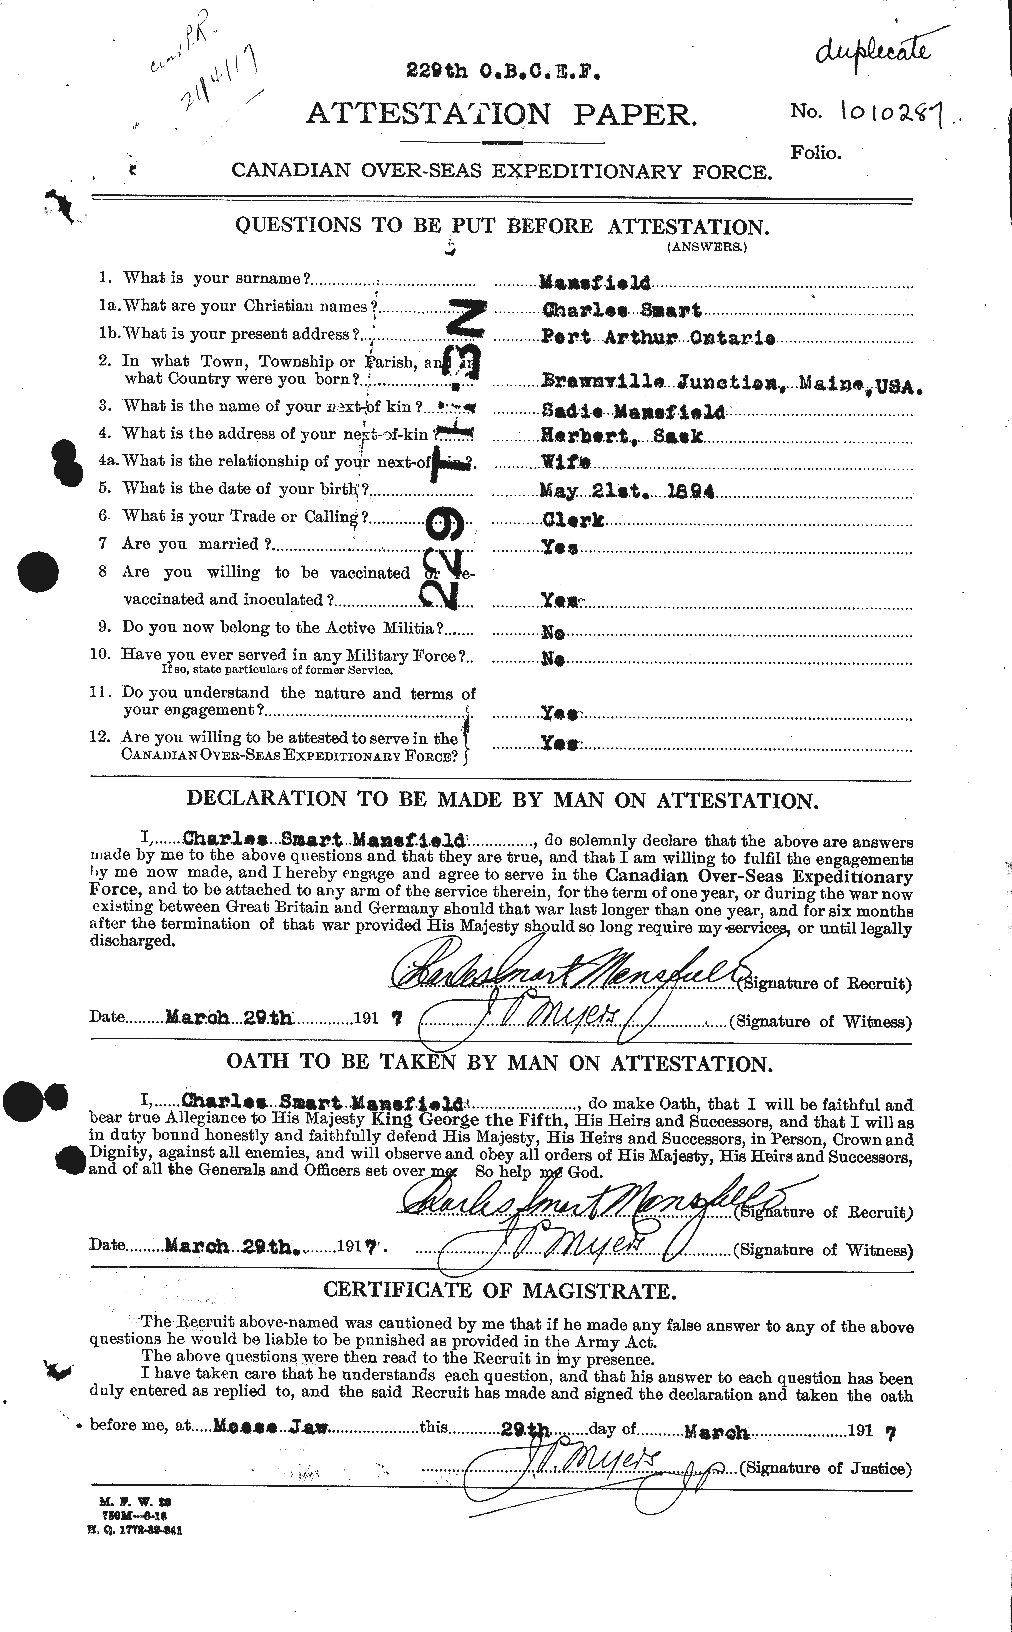 Personnel Records of the First World War - CEF 482309a